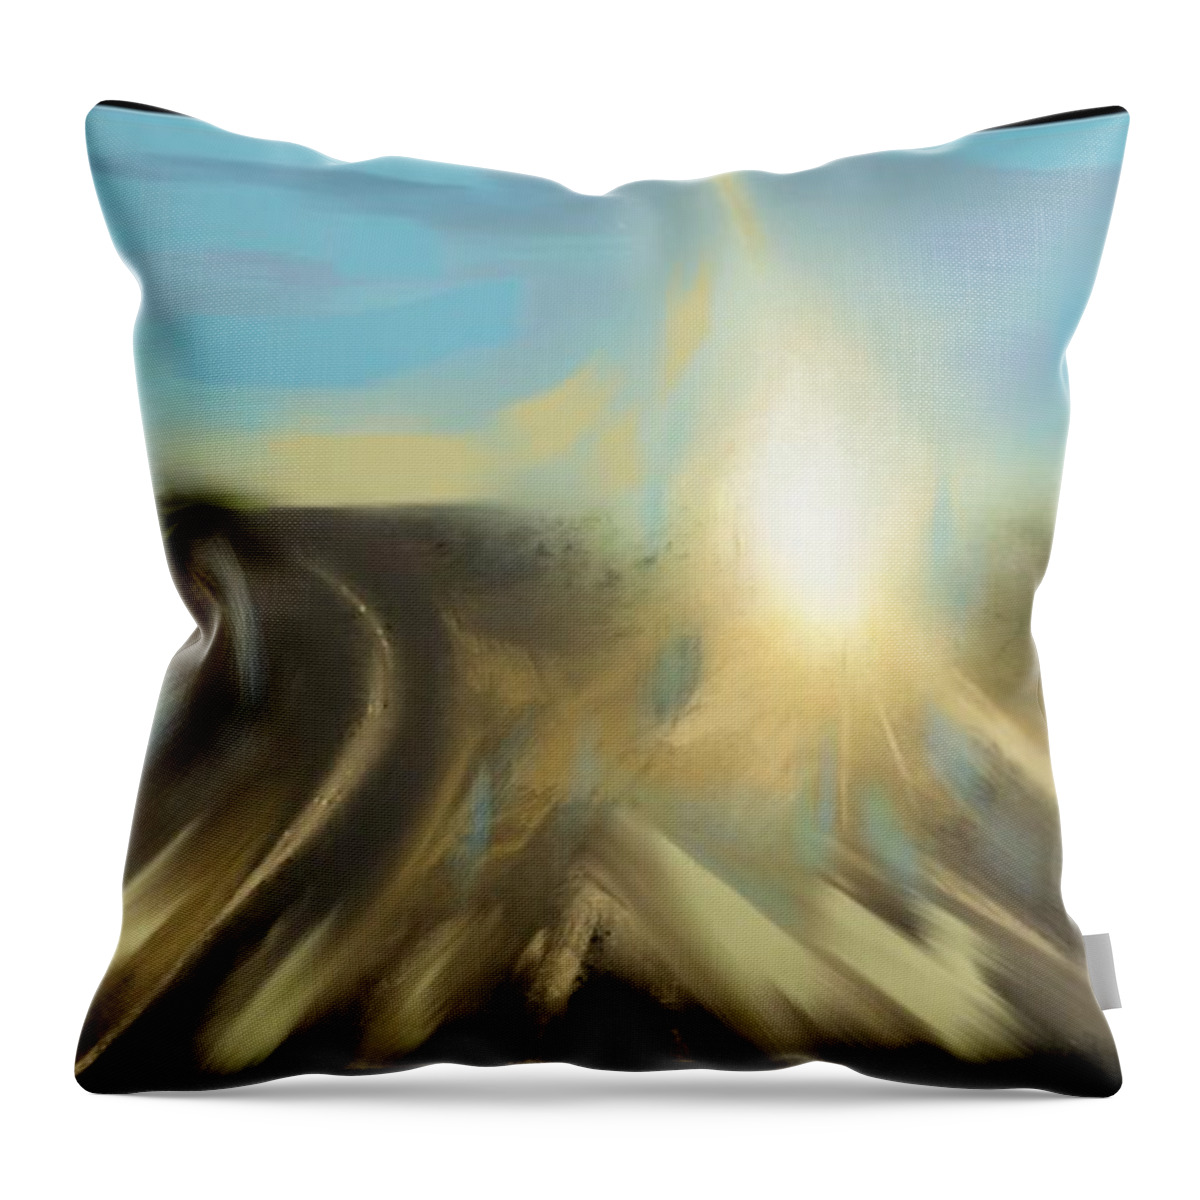 Landscape Throw Pillow featuring the digital art Sunrise by Angela Weddle